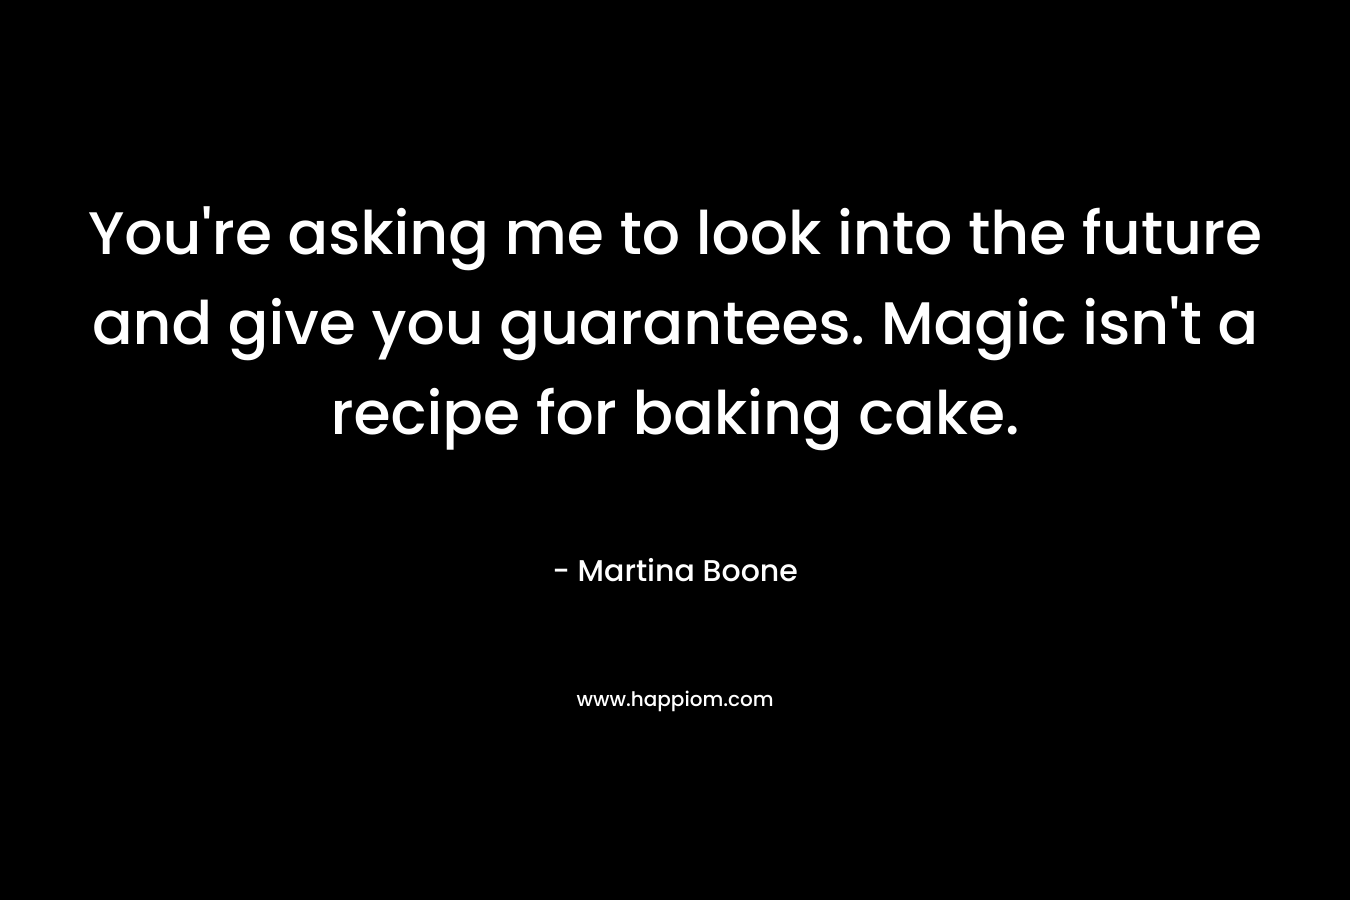 You're asking me to look into the future and give you guarantees. Magic isn't a recipe for baking cake.